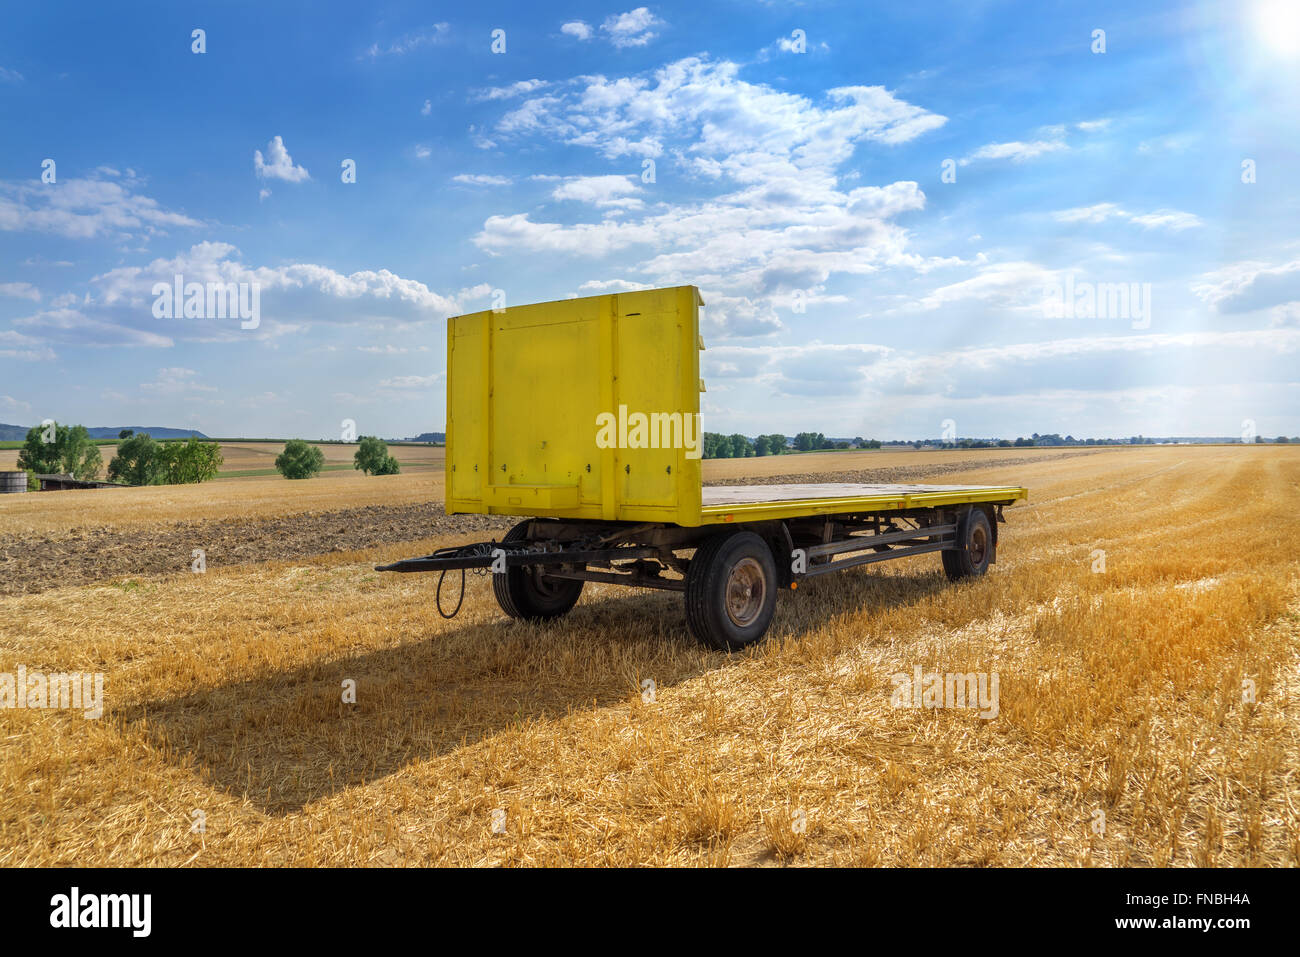 Big yellow trailer with open loading area in a stubble field in rural landscape Stock Photo